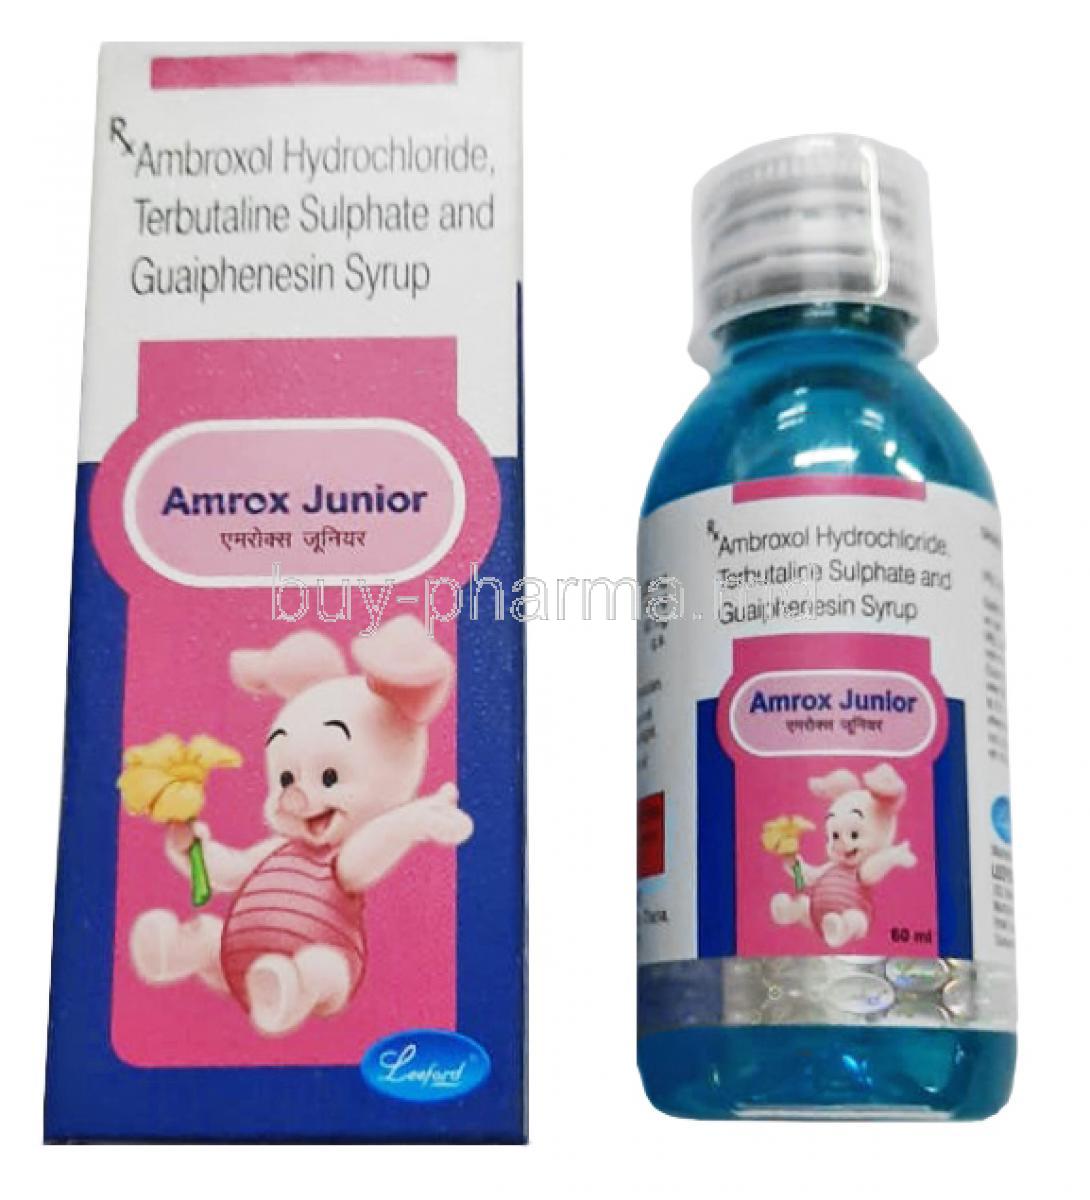 Amrox Junior Syrup, Ambroxol, Guaifenesin and Terbutaline box and bottle